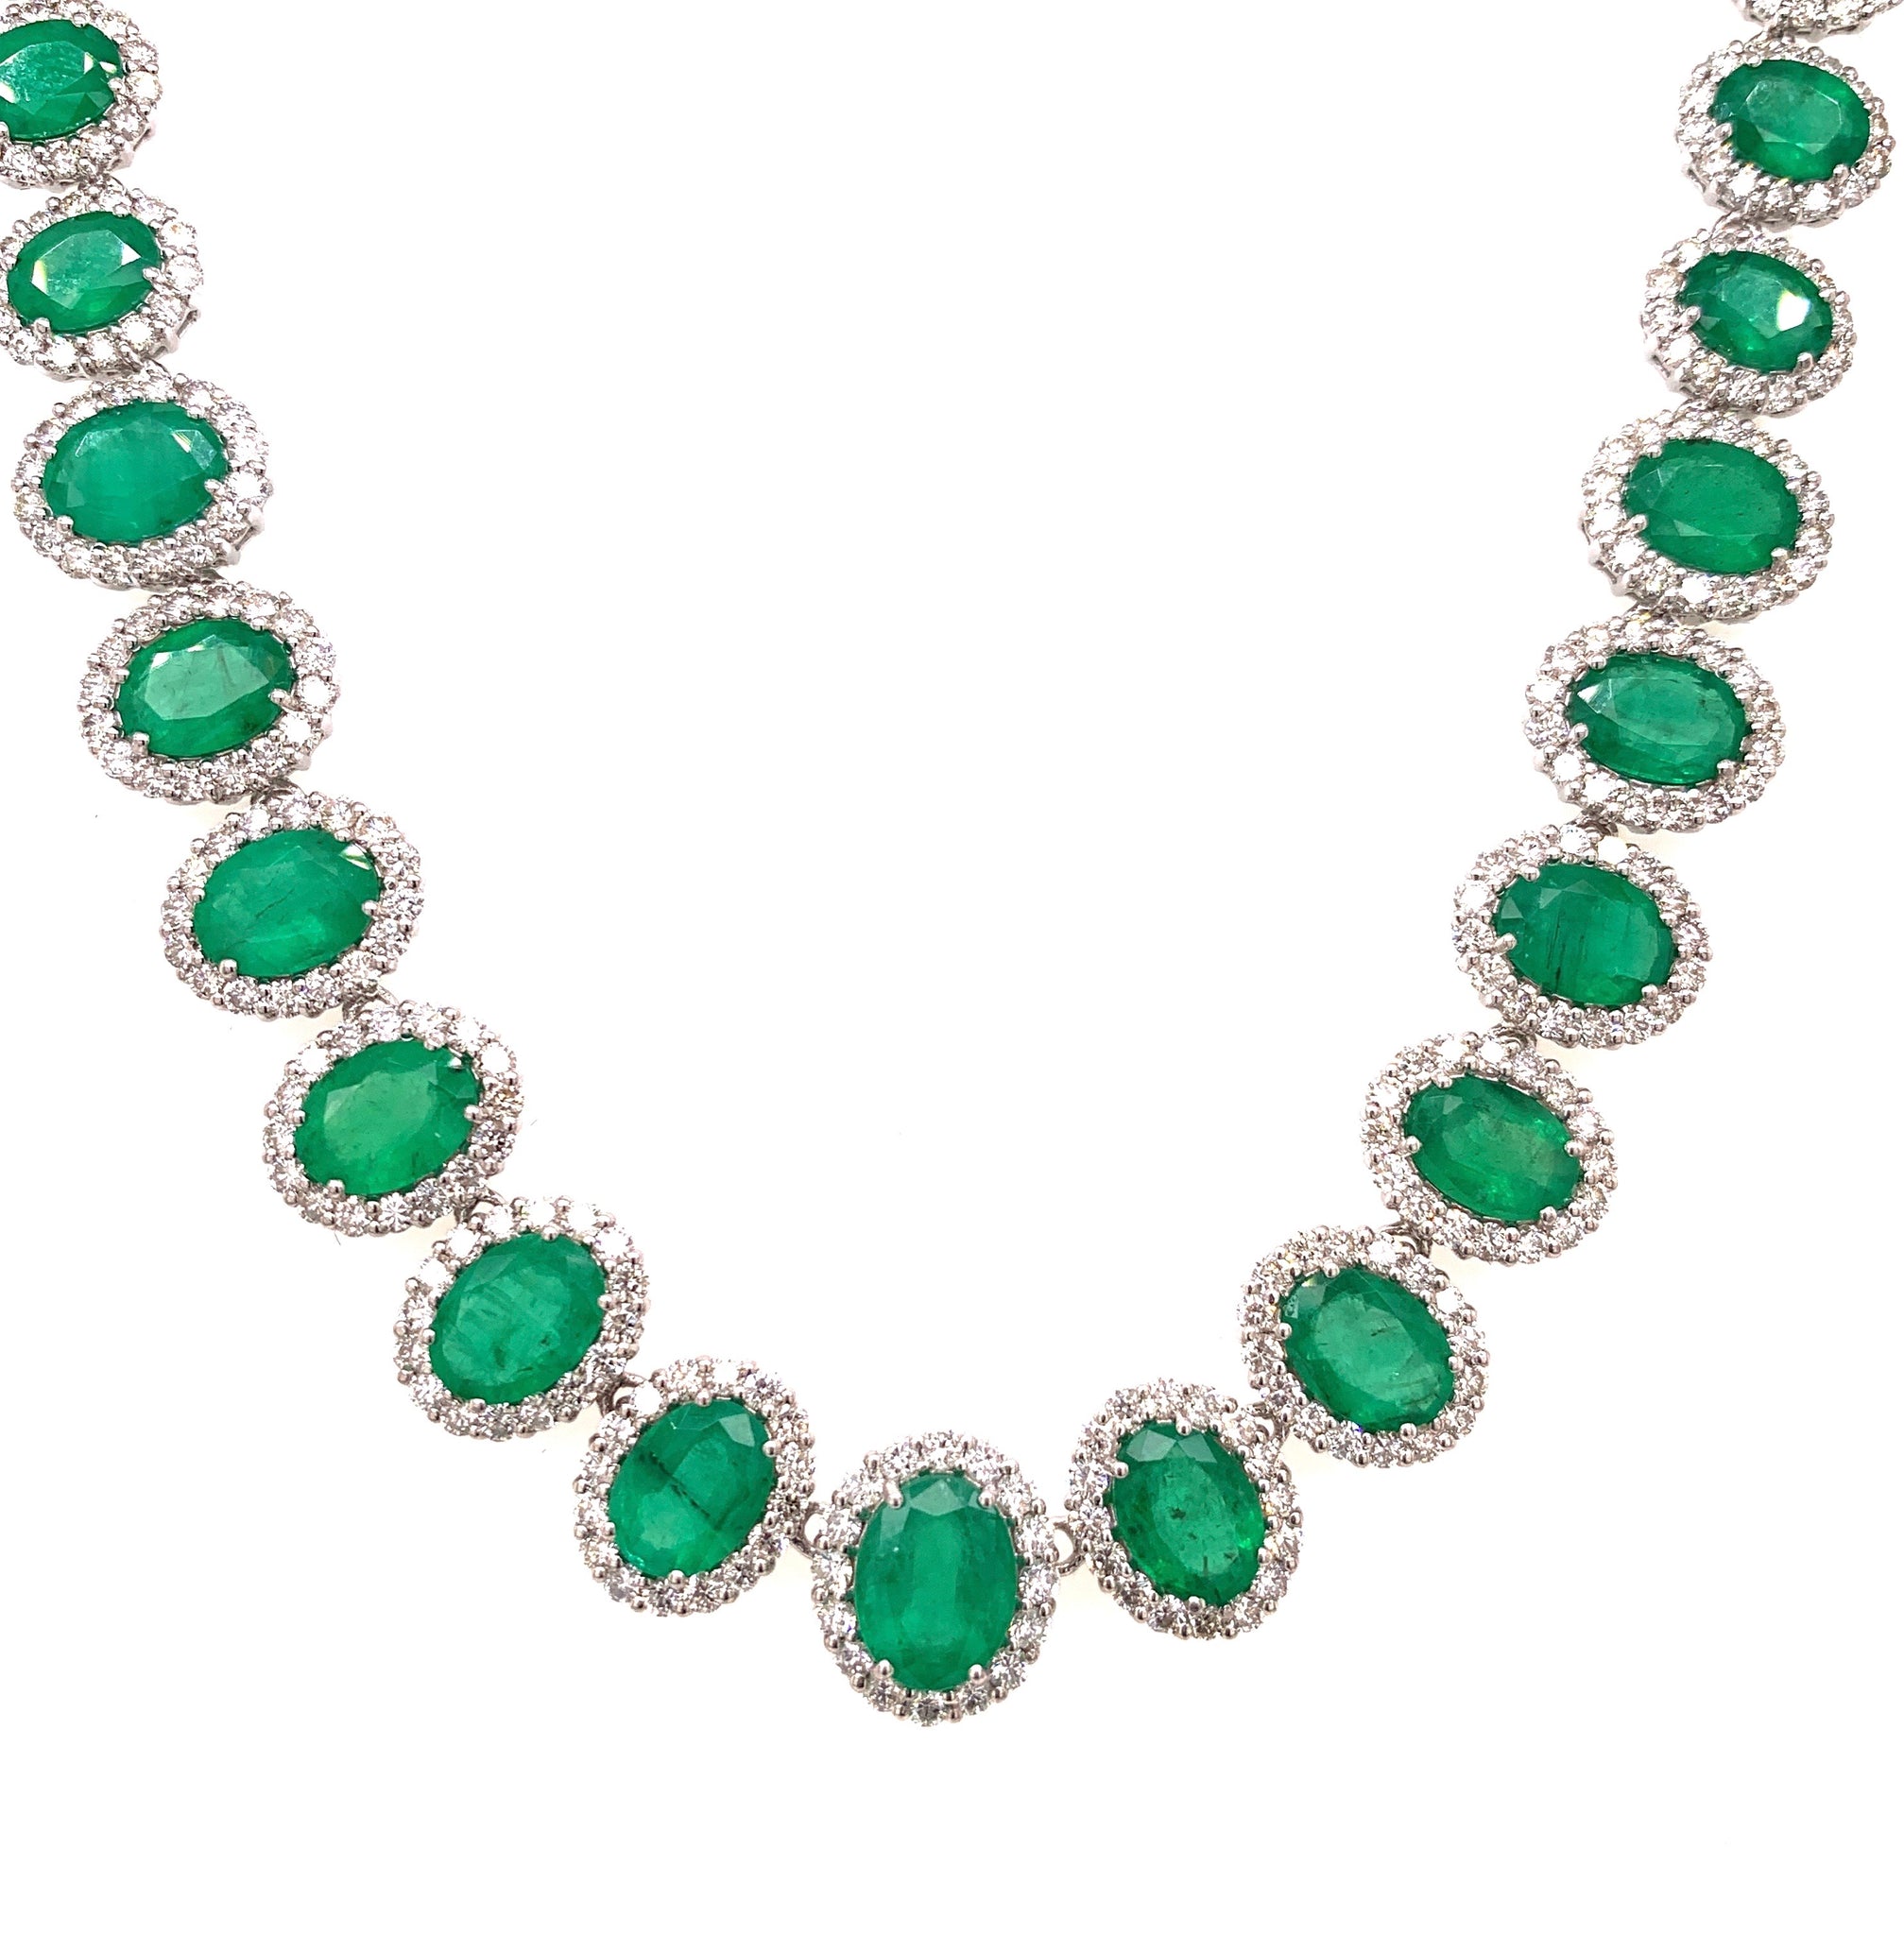 Alloy Steel Round AN ADORABLE GREEN STONE AMERICAN DIAMOND NECKLACE SET  WITH EARRINGS, Size: 3 Inch ( Earing Length) at Rs 800/set in New Delhi